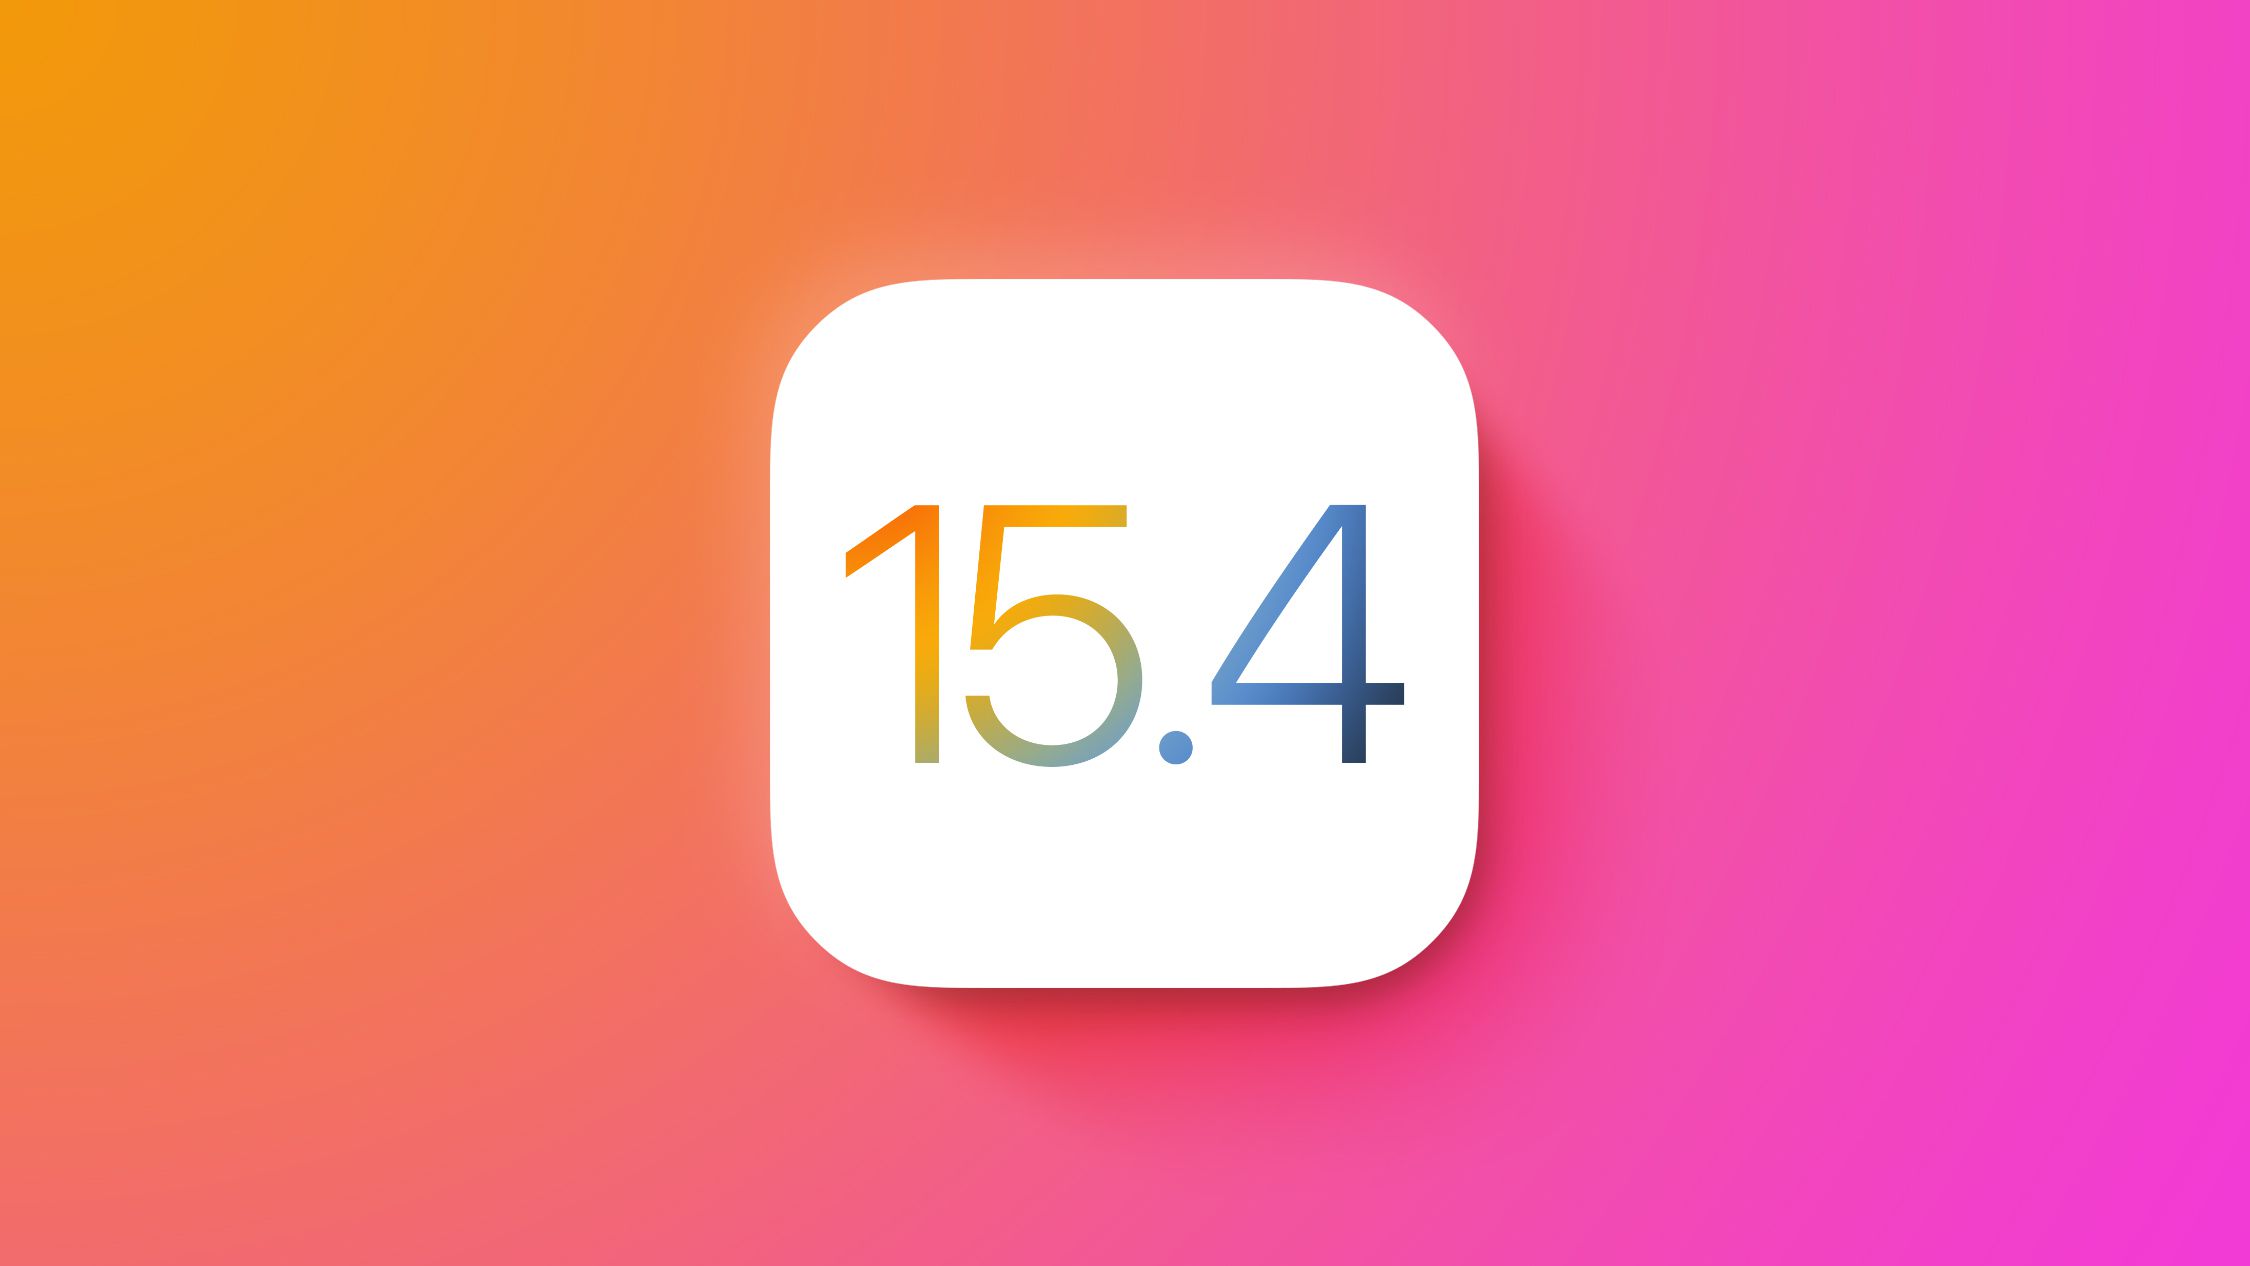 Apple Releases iOS 15.4 and iPadOS 15.4 With Face ID Mask Unlock, New Emoji, Universal Control, and More